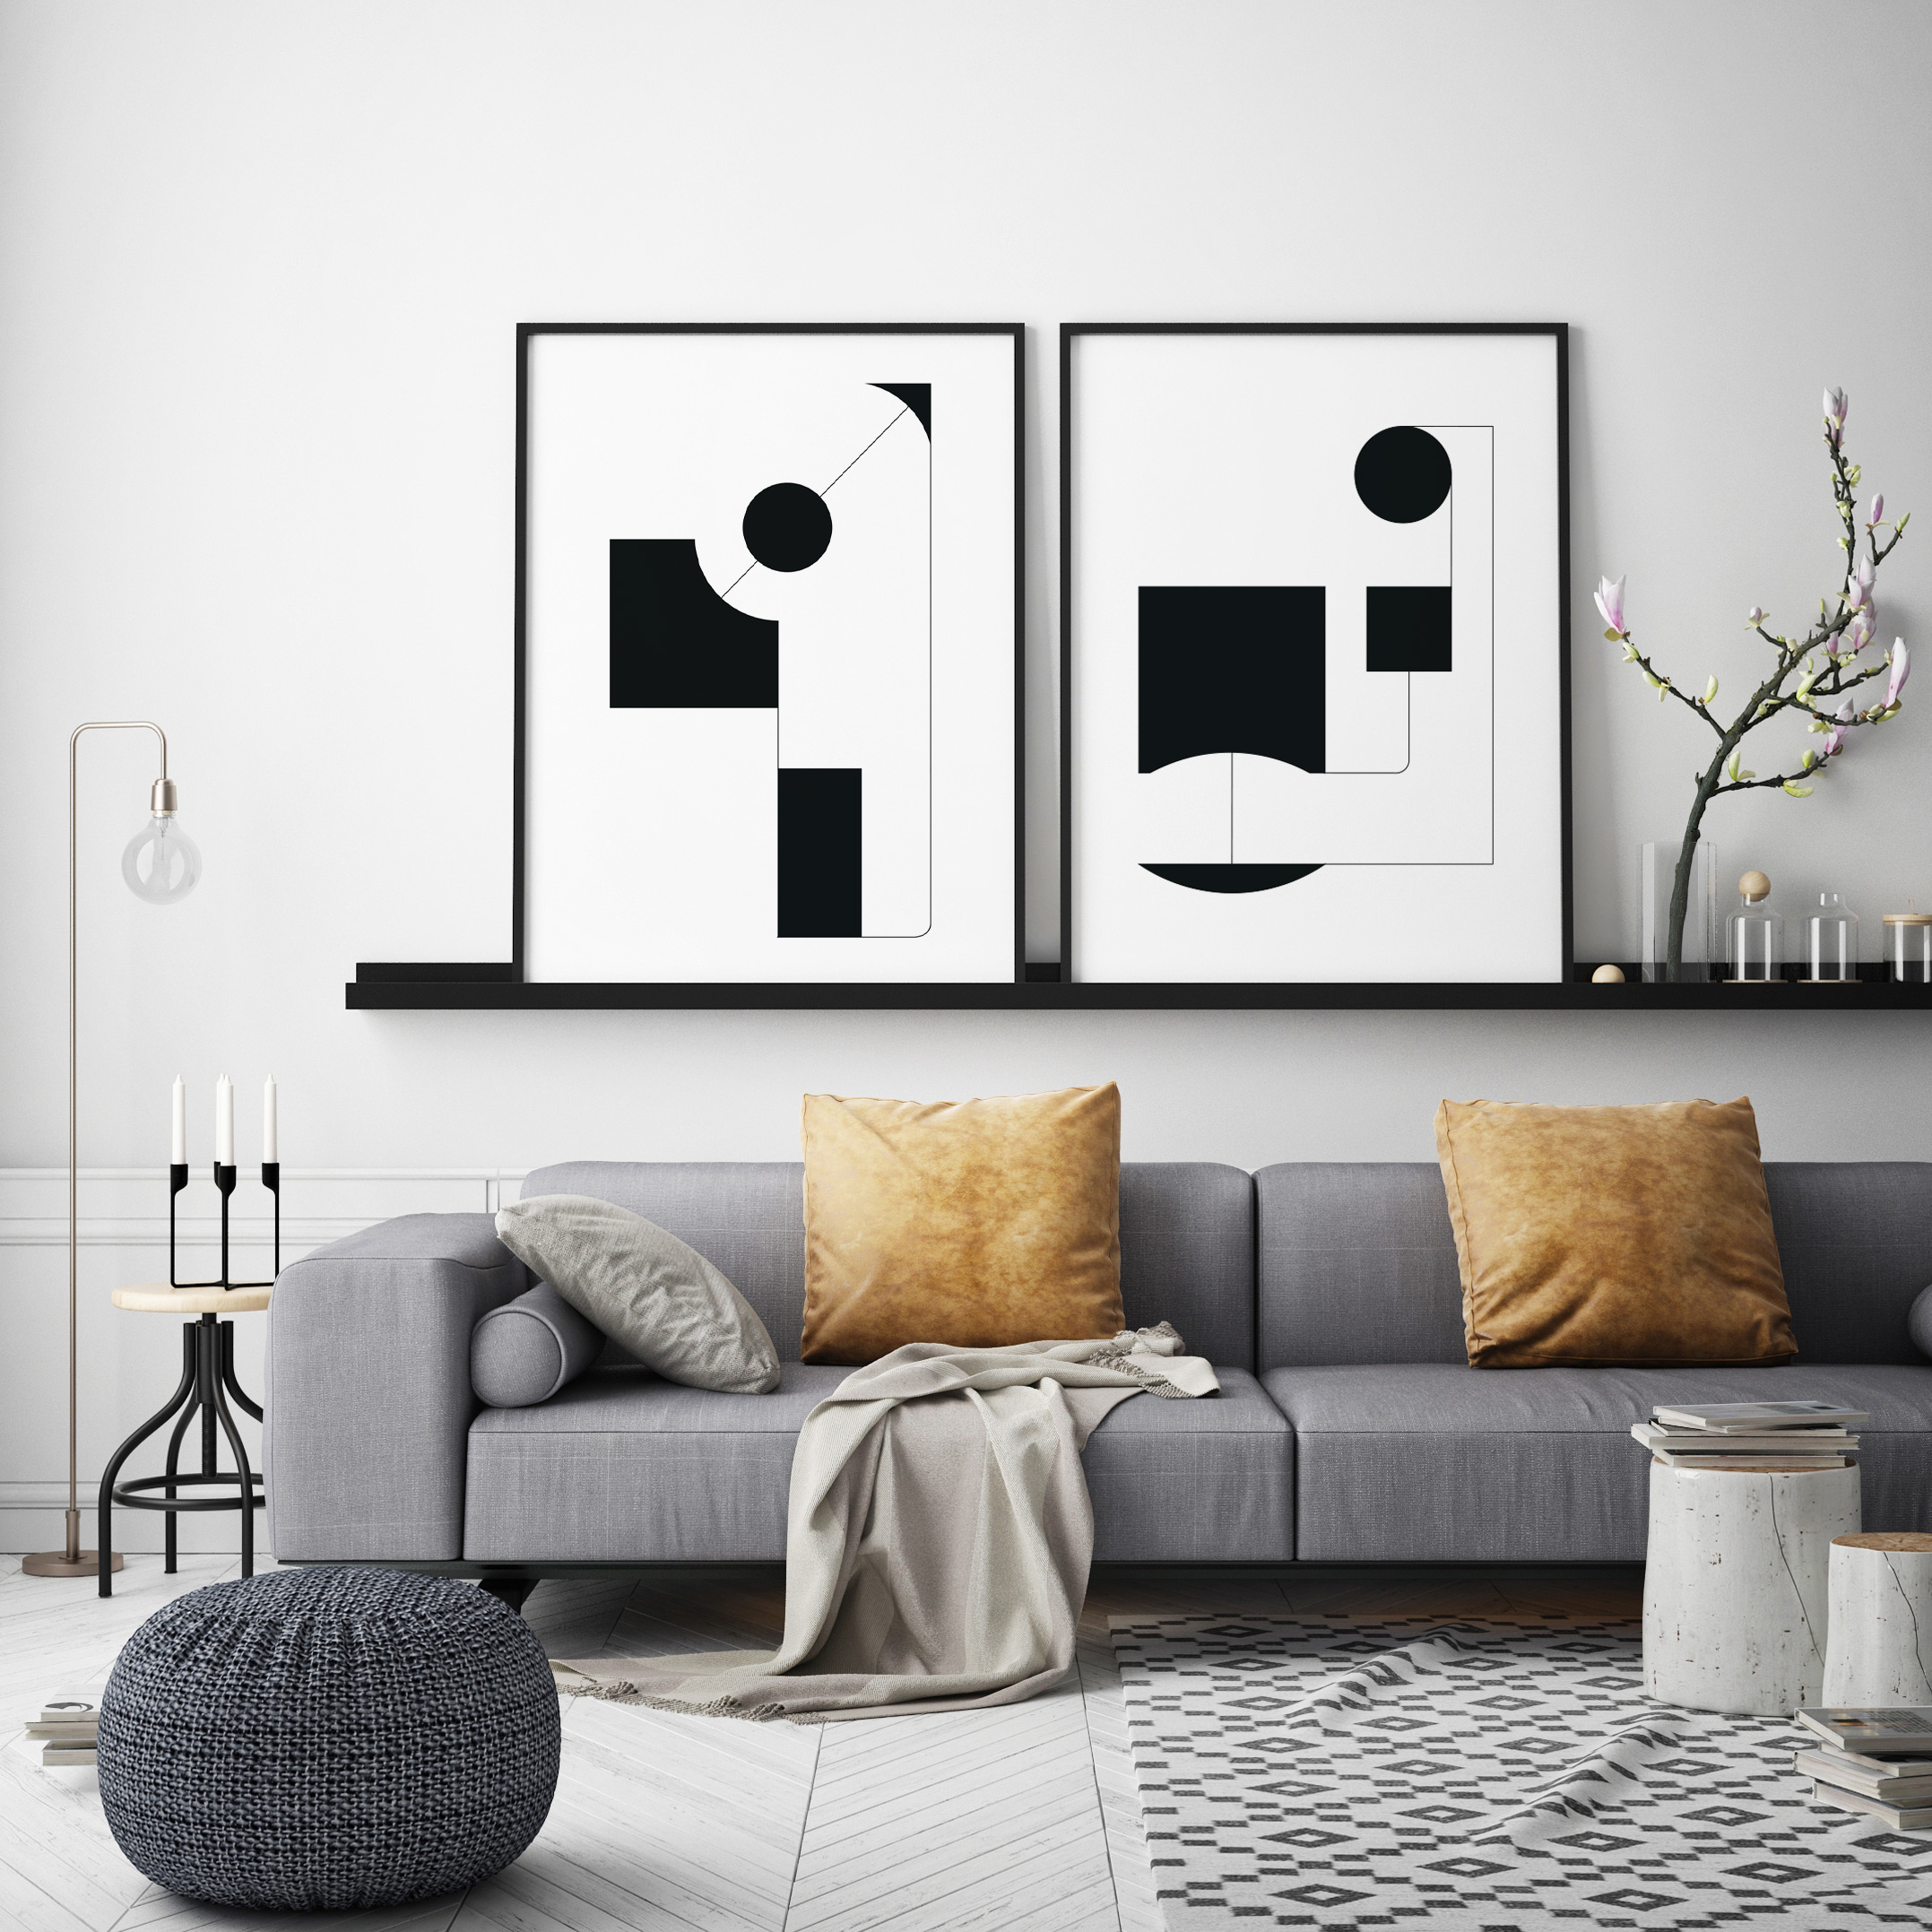 TERESA VAN // STRUCTURED SHAPES M08 - HAND PAINTED PICTURES | BLACK + WHITE